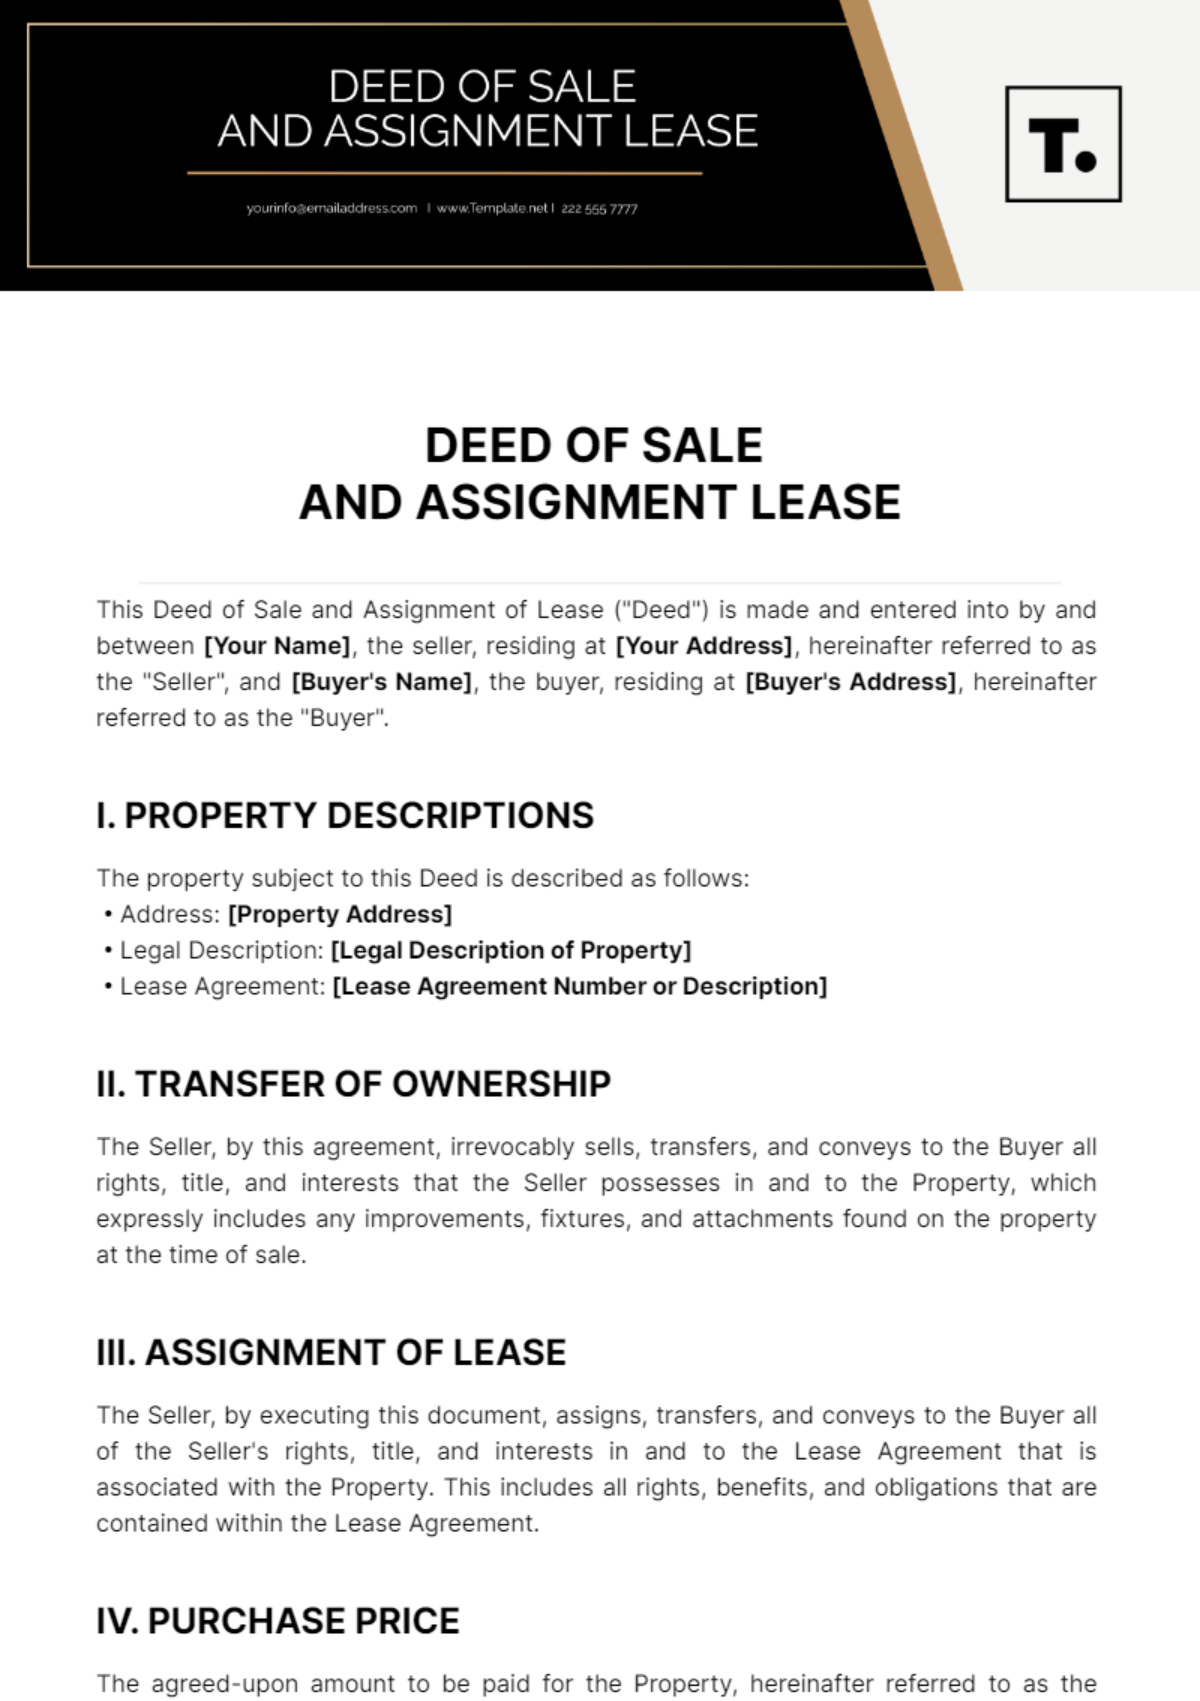 Free Deed of Sale and Assignment Lease Template